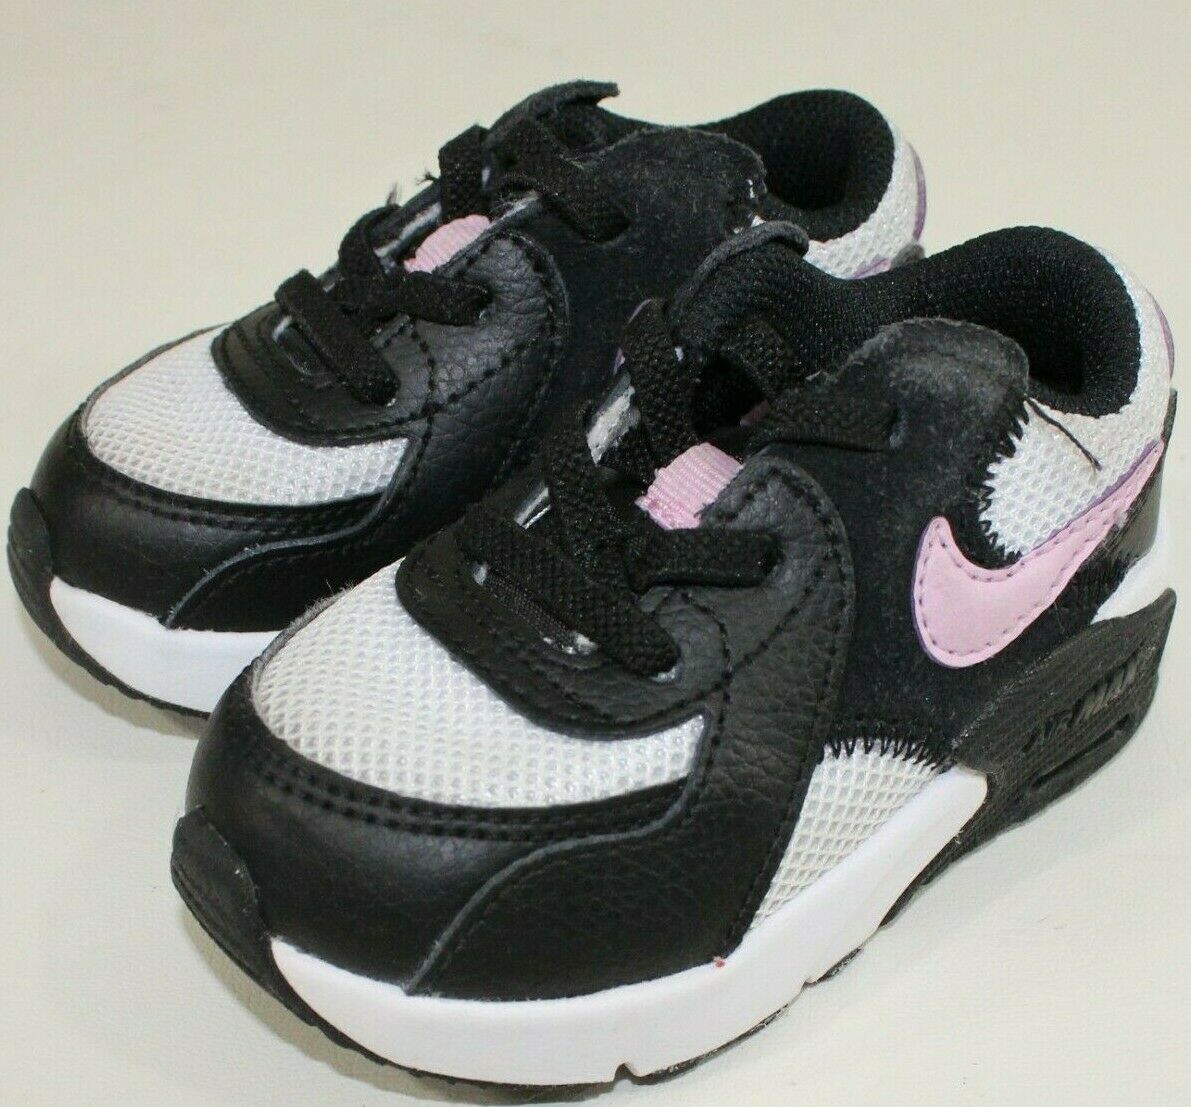 Nike Girls Infant Air Max 90 Excee Shoes CD6893-004 Size 5c